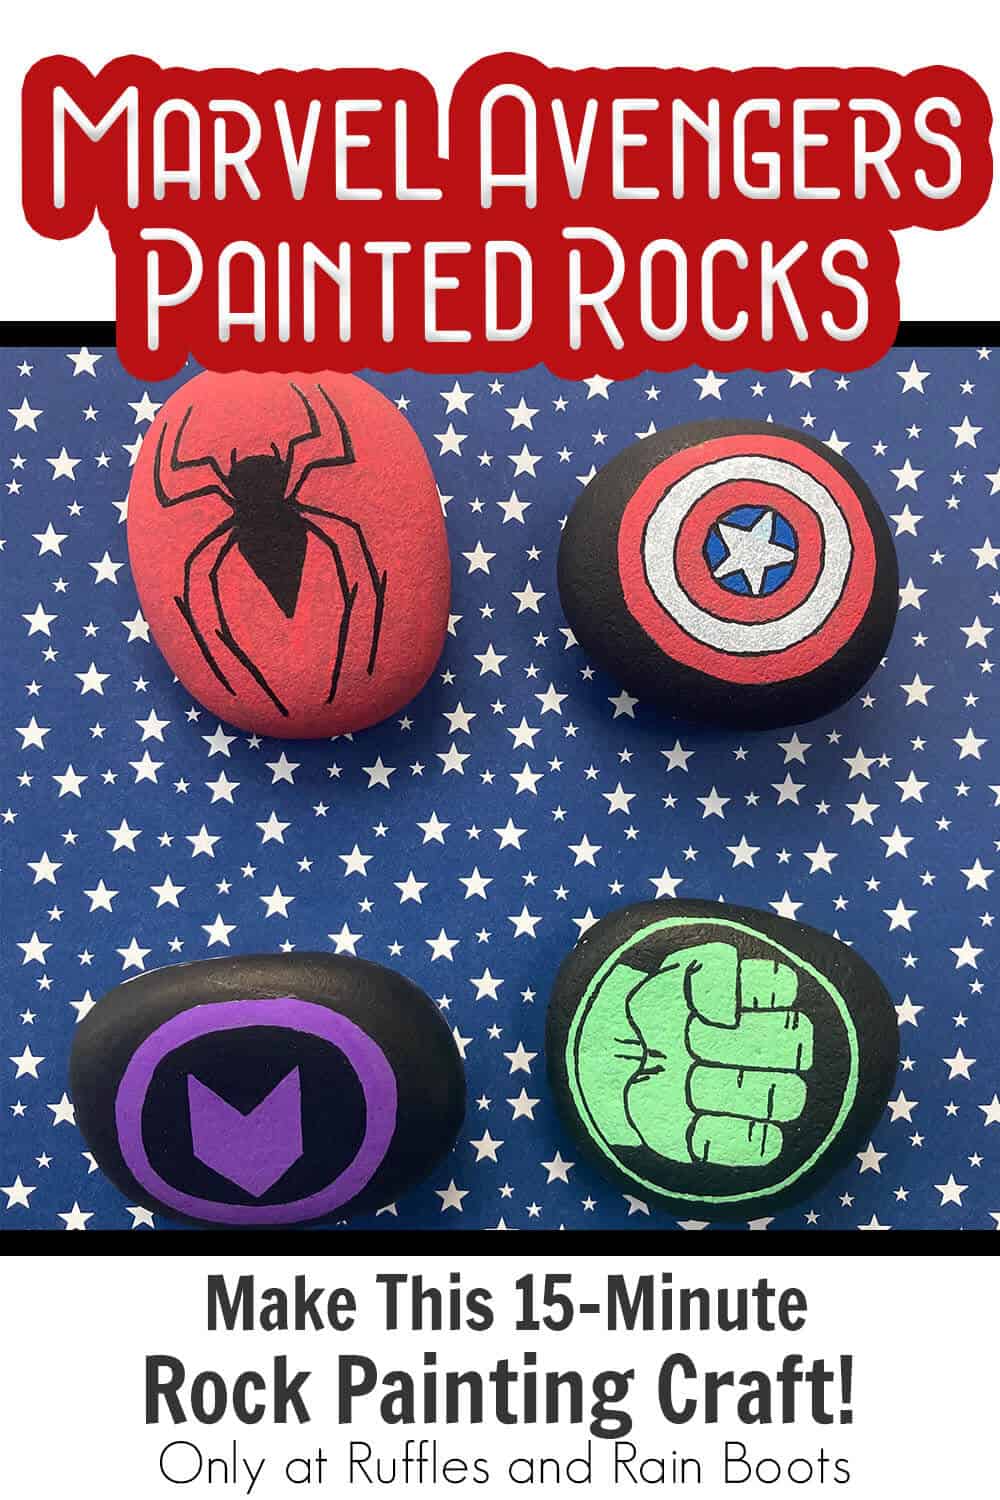 rock painting instructions for avengers assemble with text which reads marvel avengers painted rocks make this 15-minute rock painting craft!